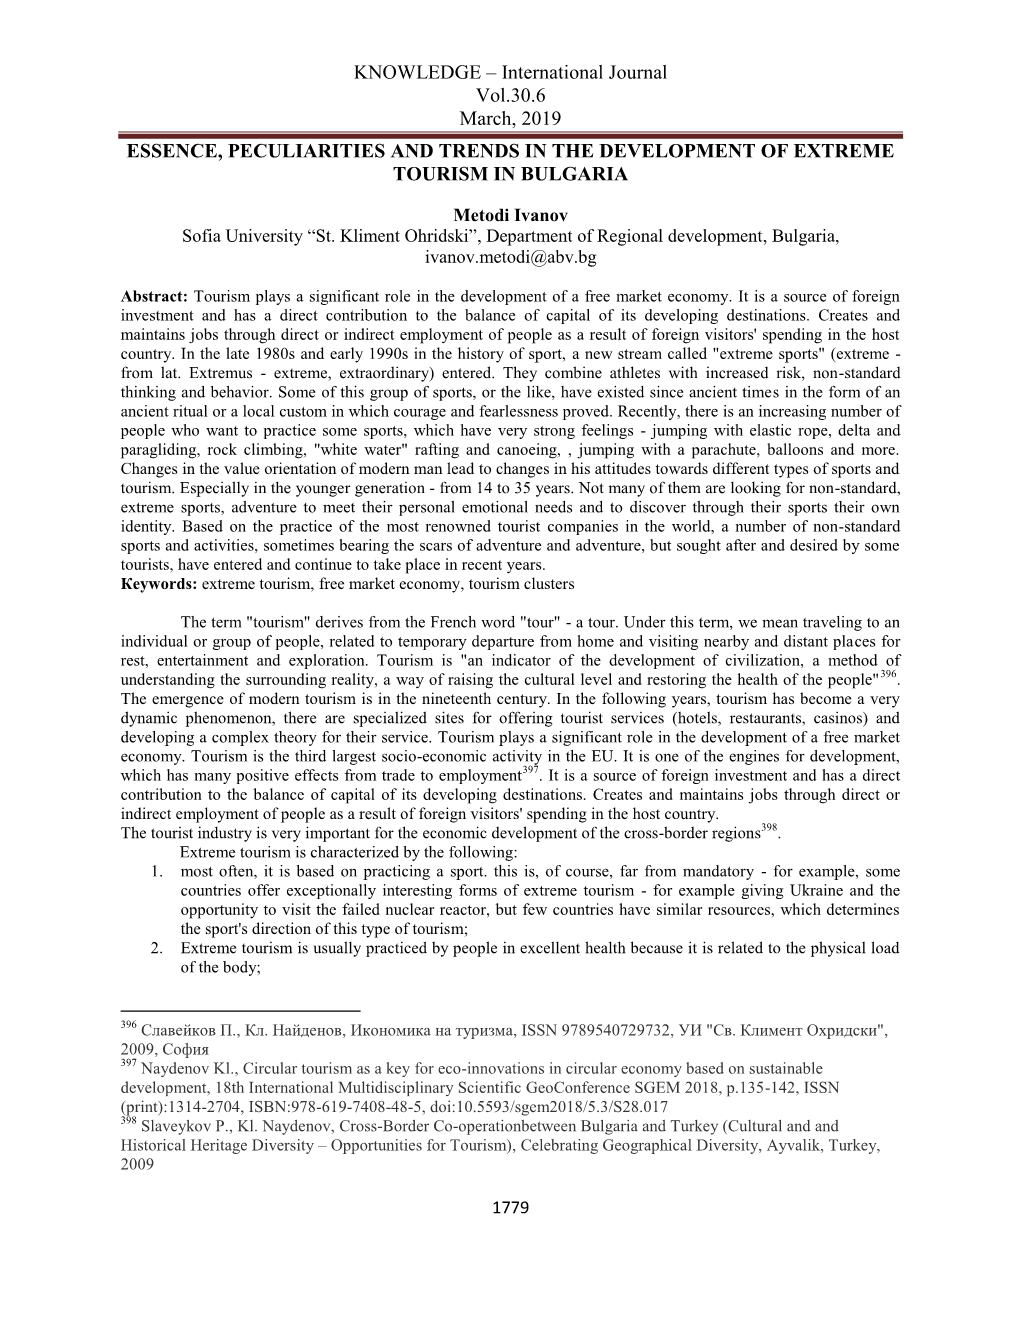 International Journal Vol.30.6 March, 2019 ESSENCE, PECULIARITIES and TRENDS in the DEVELOPMENT of EXTREME TOURISM in BULGARIA